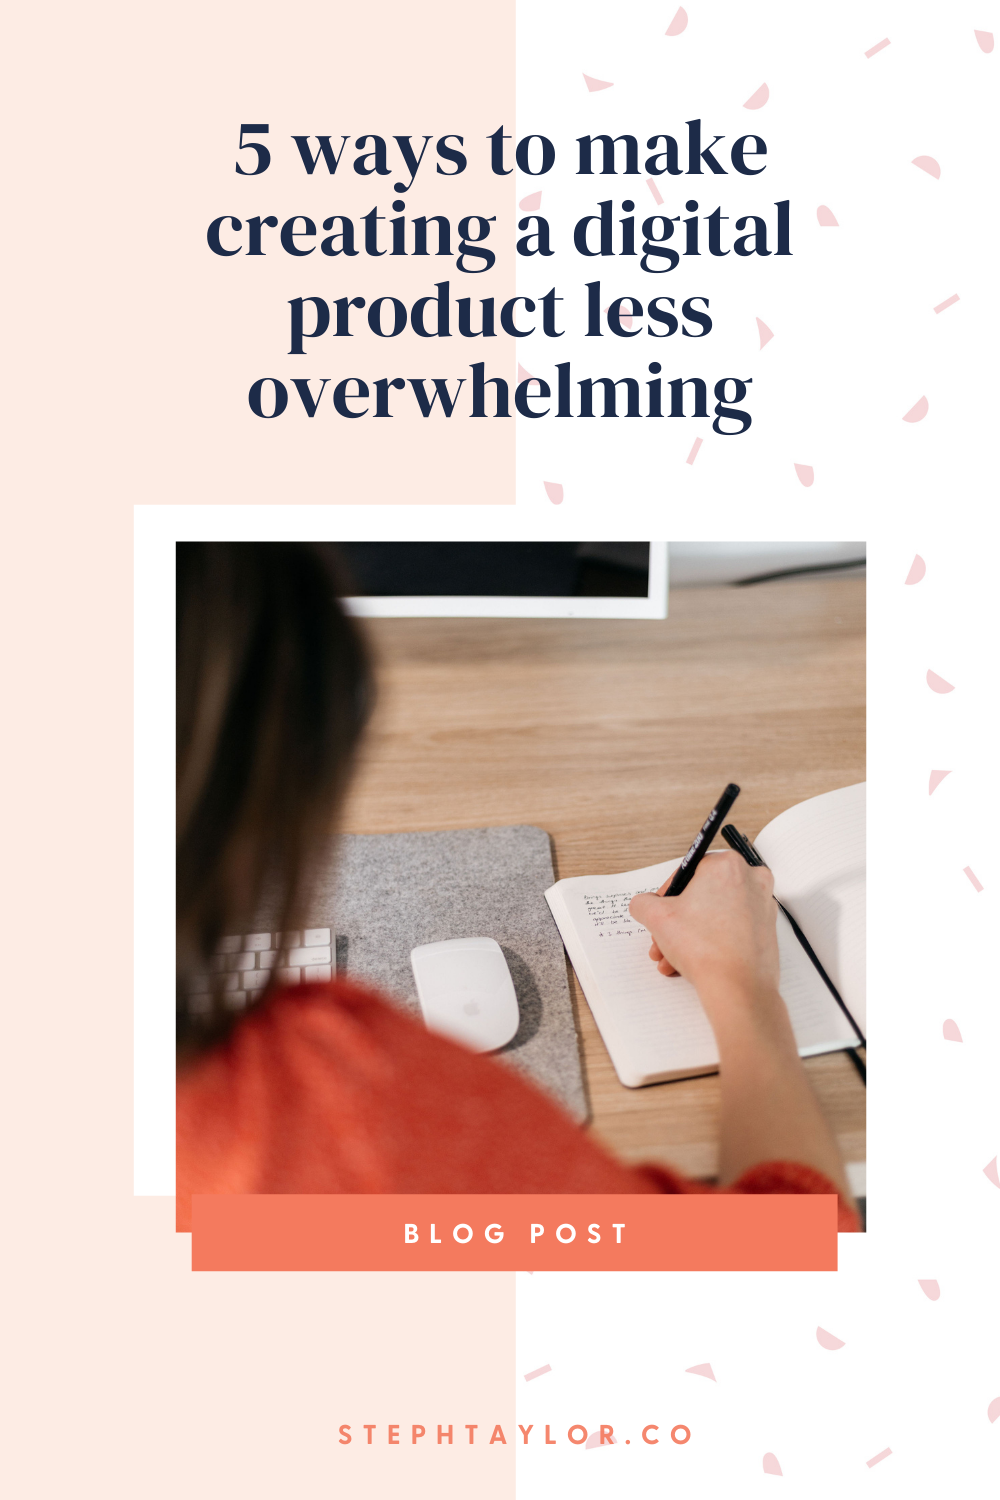 5 ways to make creating a digital product less overwhelming